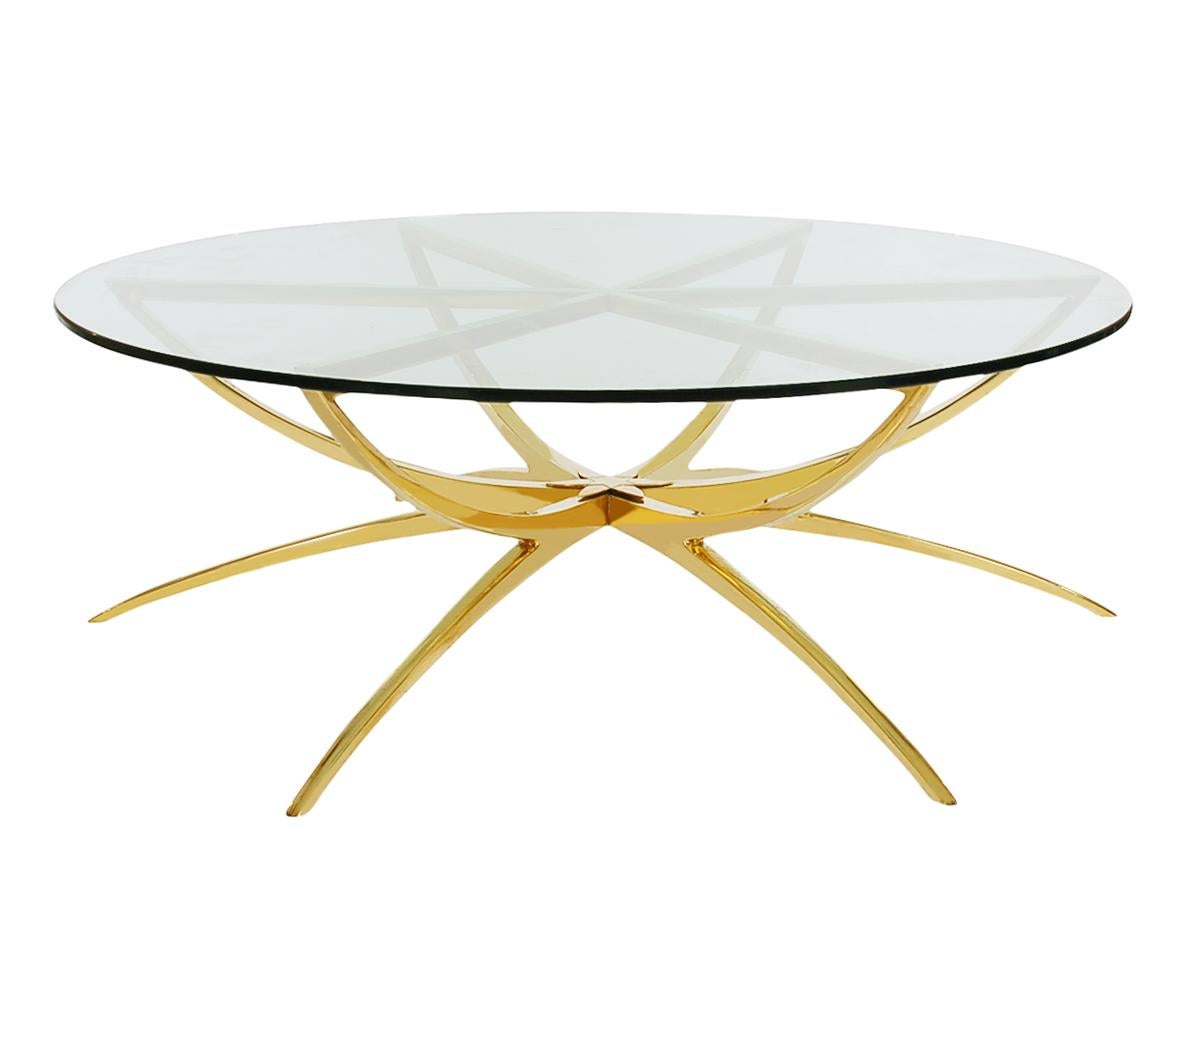 Solid Brass Midcentury Italian Modern Round Glass Top Spider Cocktail Table For Sale 1